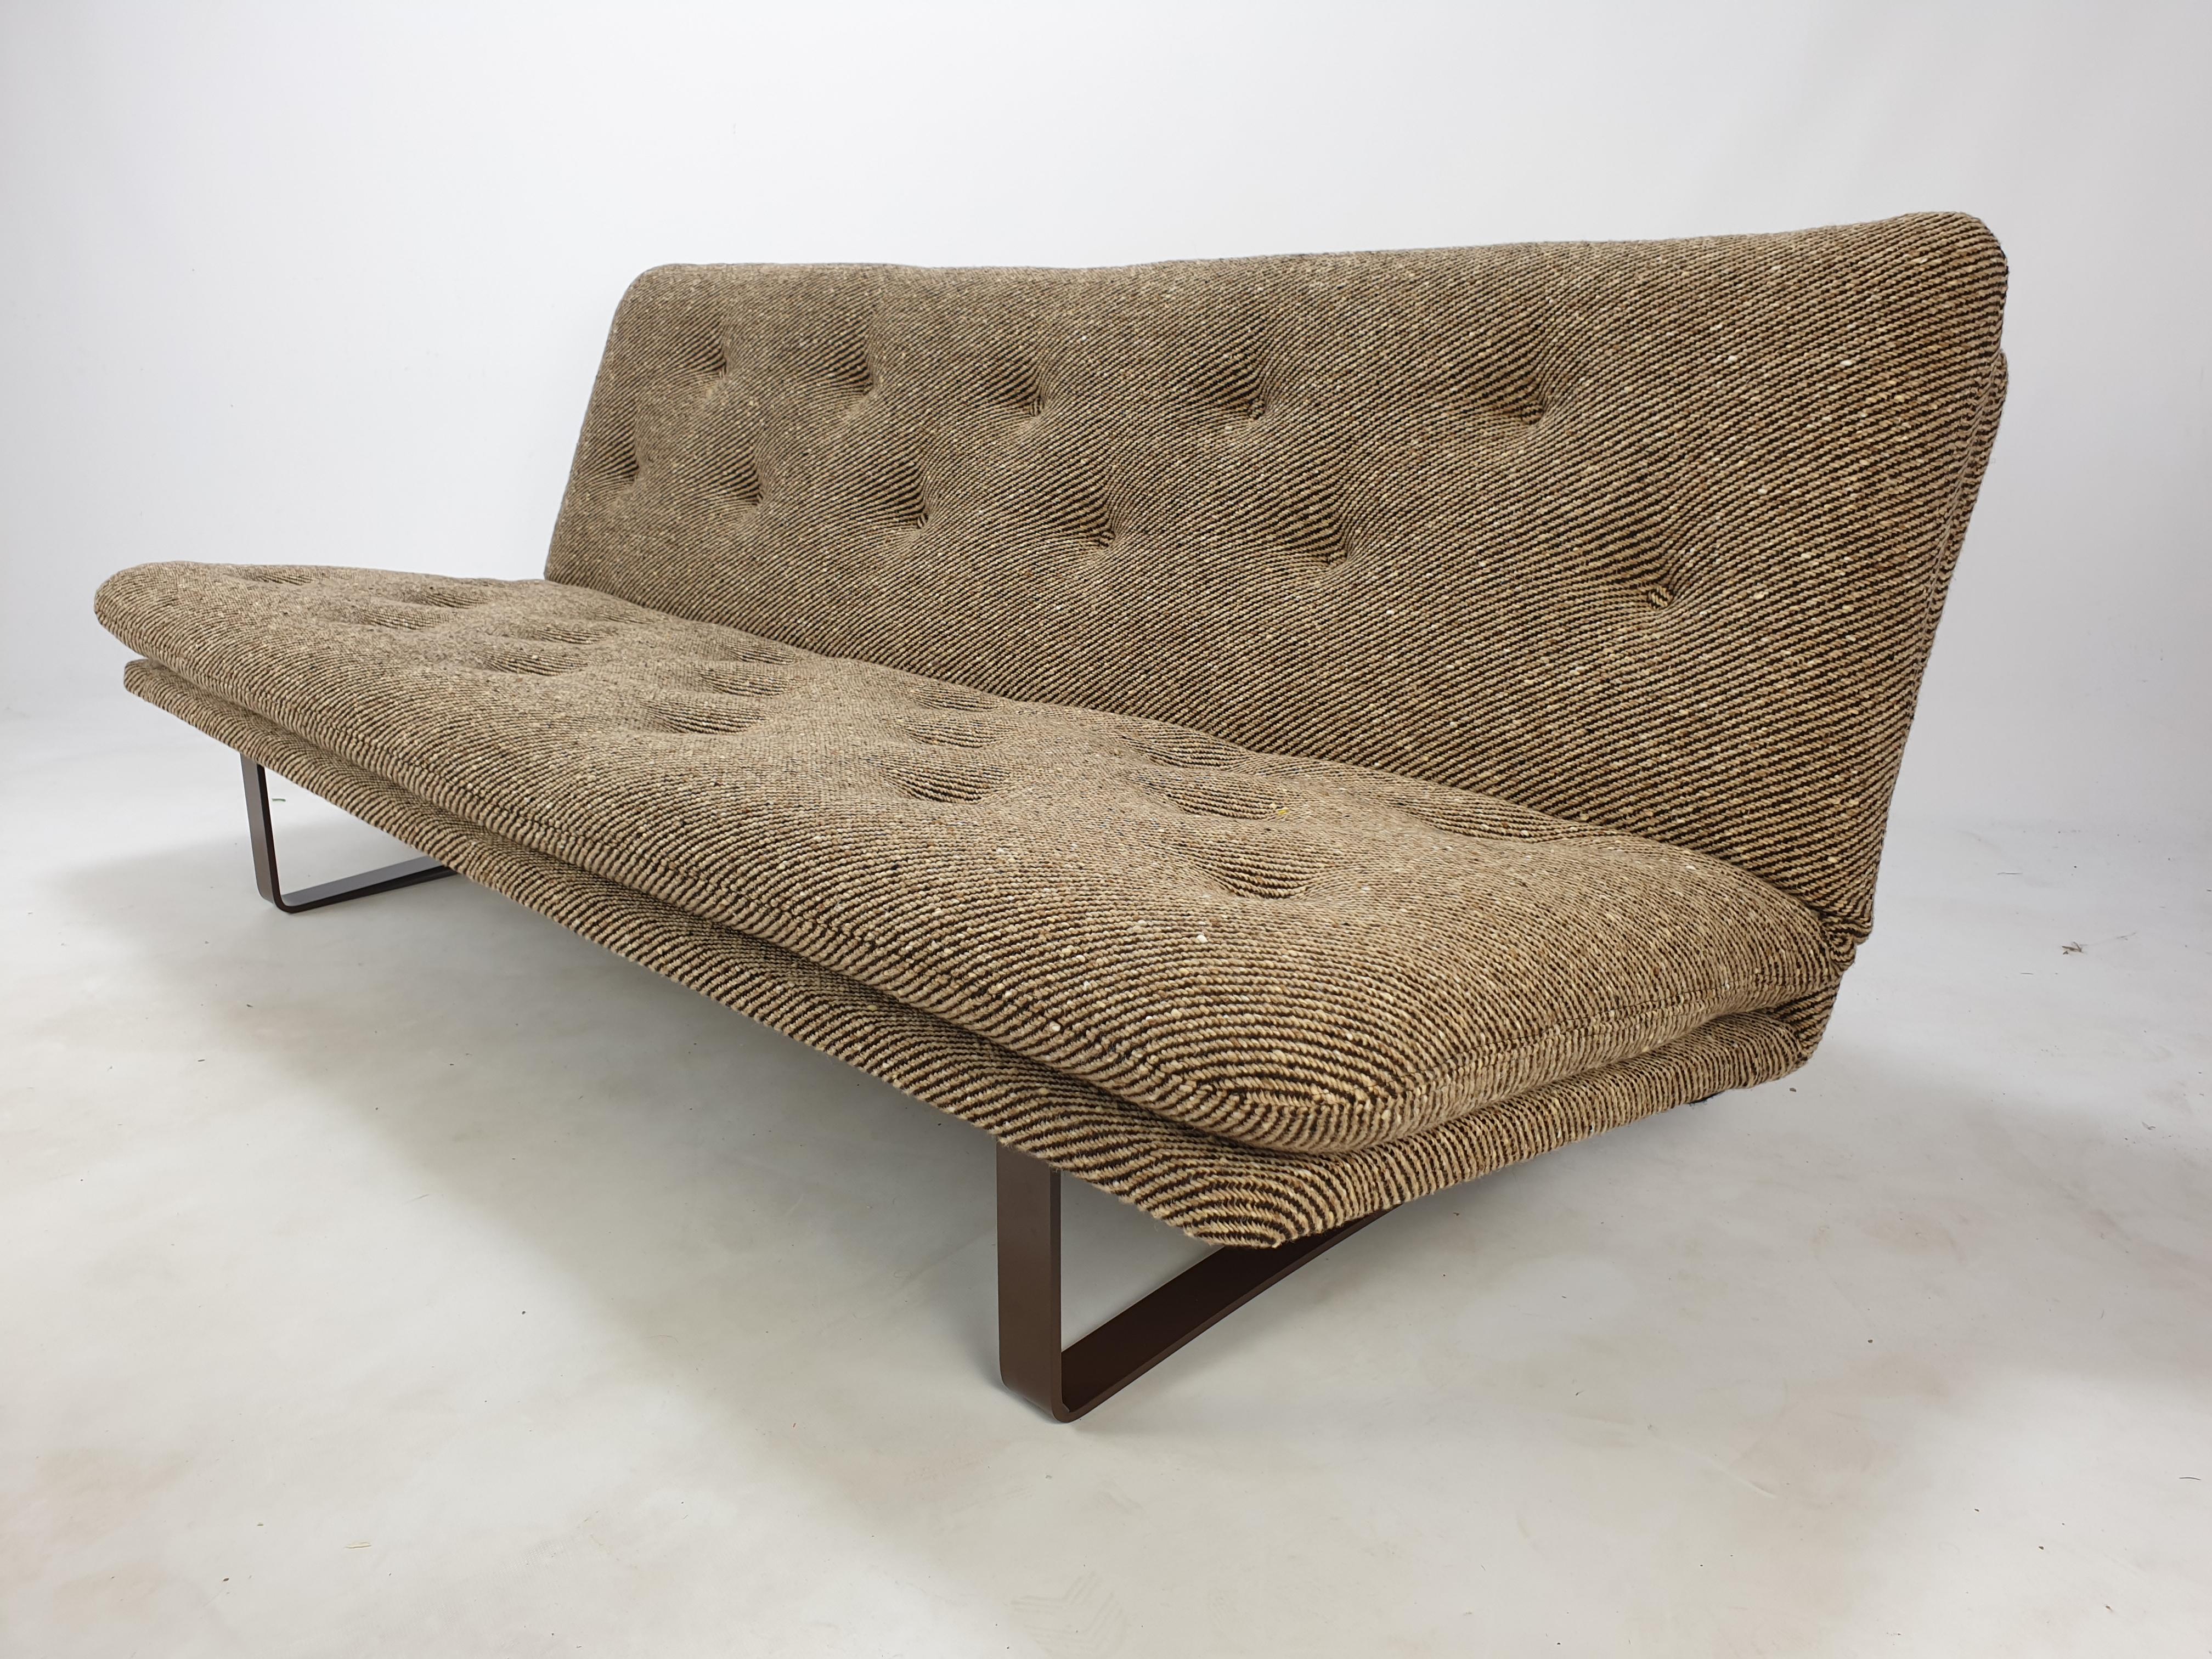 Stunning and comfortabele 3 seat sofa designed by Kho Liang Ie. Manufactured by Artifort in the 60's. 
Very solid and high quality, made with the best materials.
The sofa has just been reupholstered with fantastic original wool fabric from the